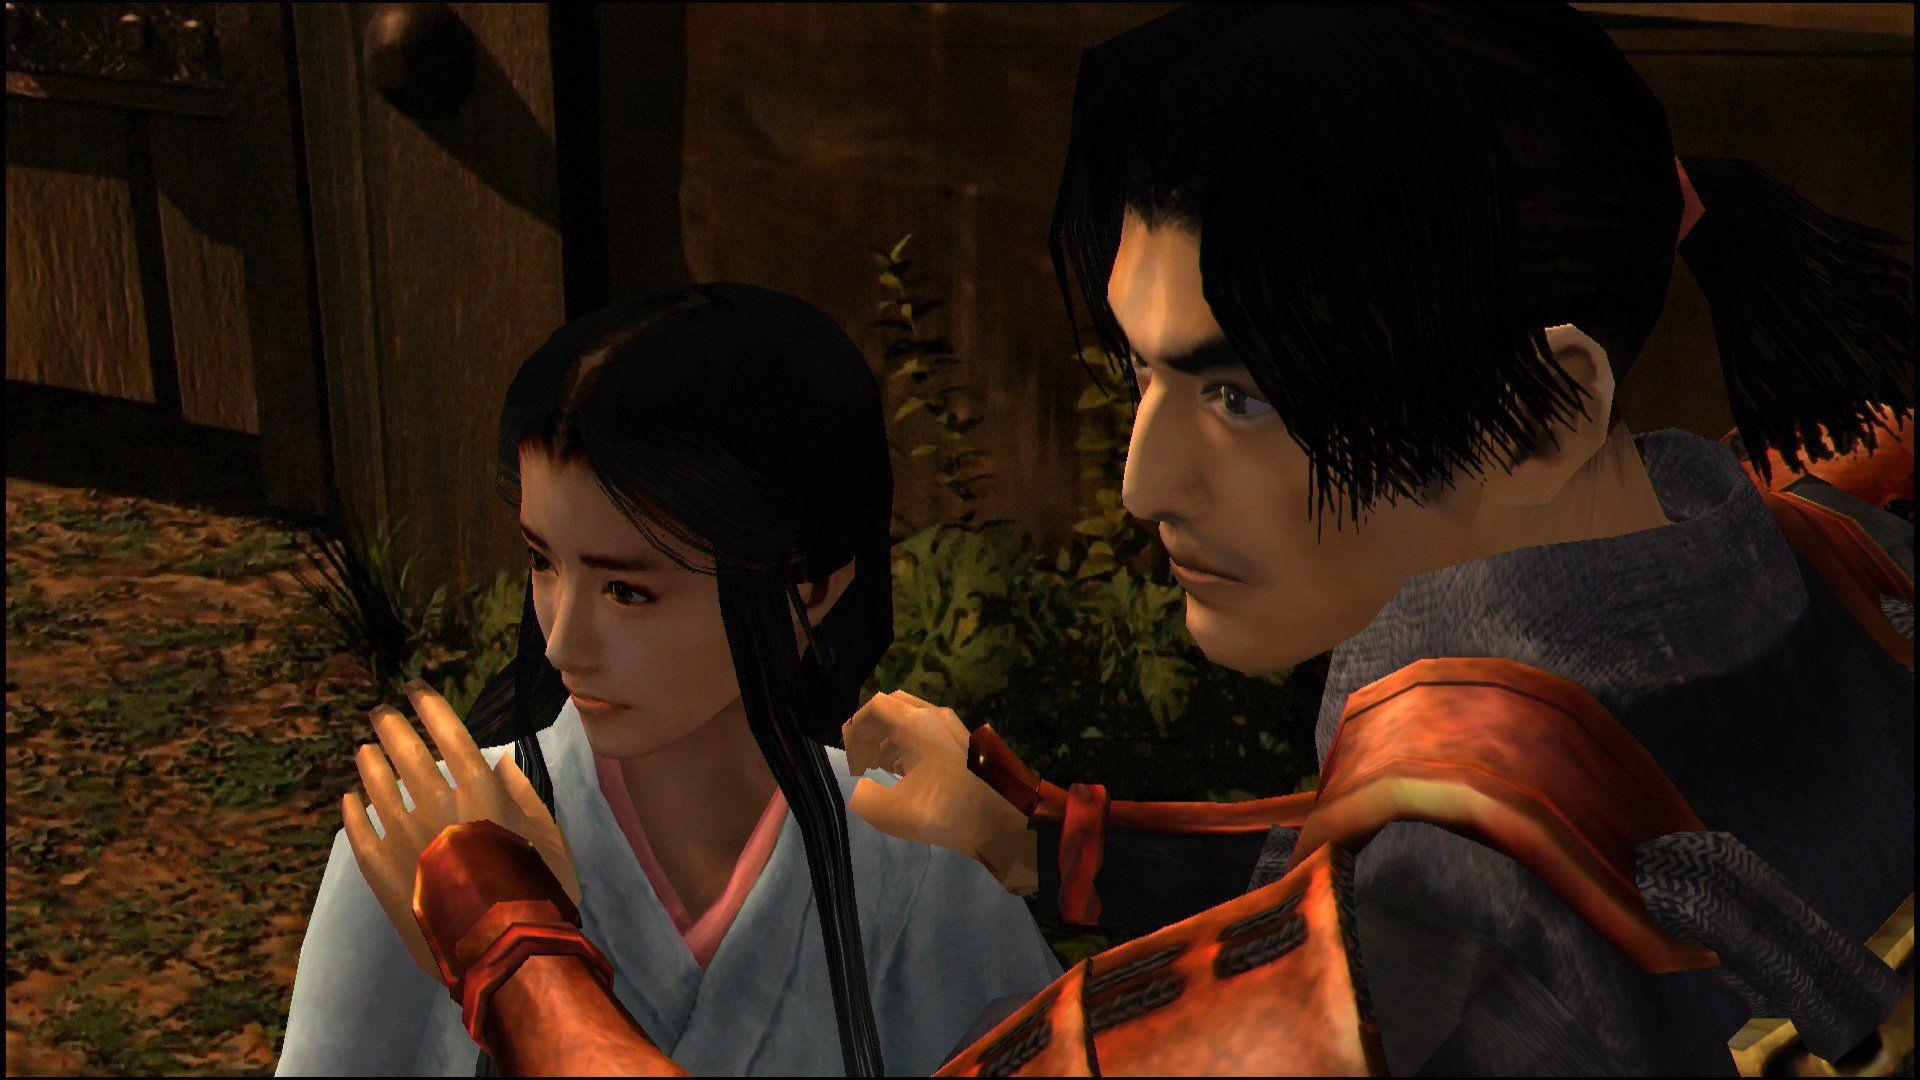 Onimusha still looks great 17 years later, especially in remastered form